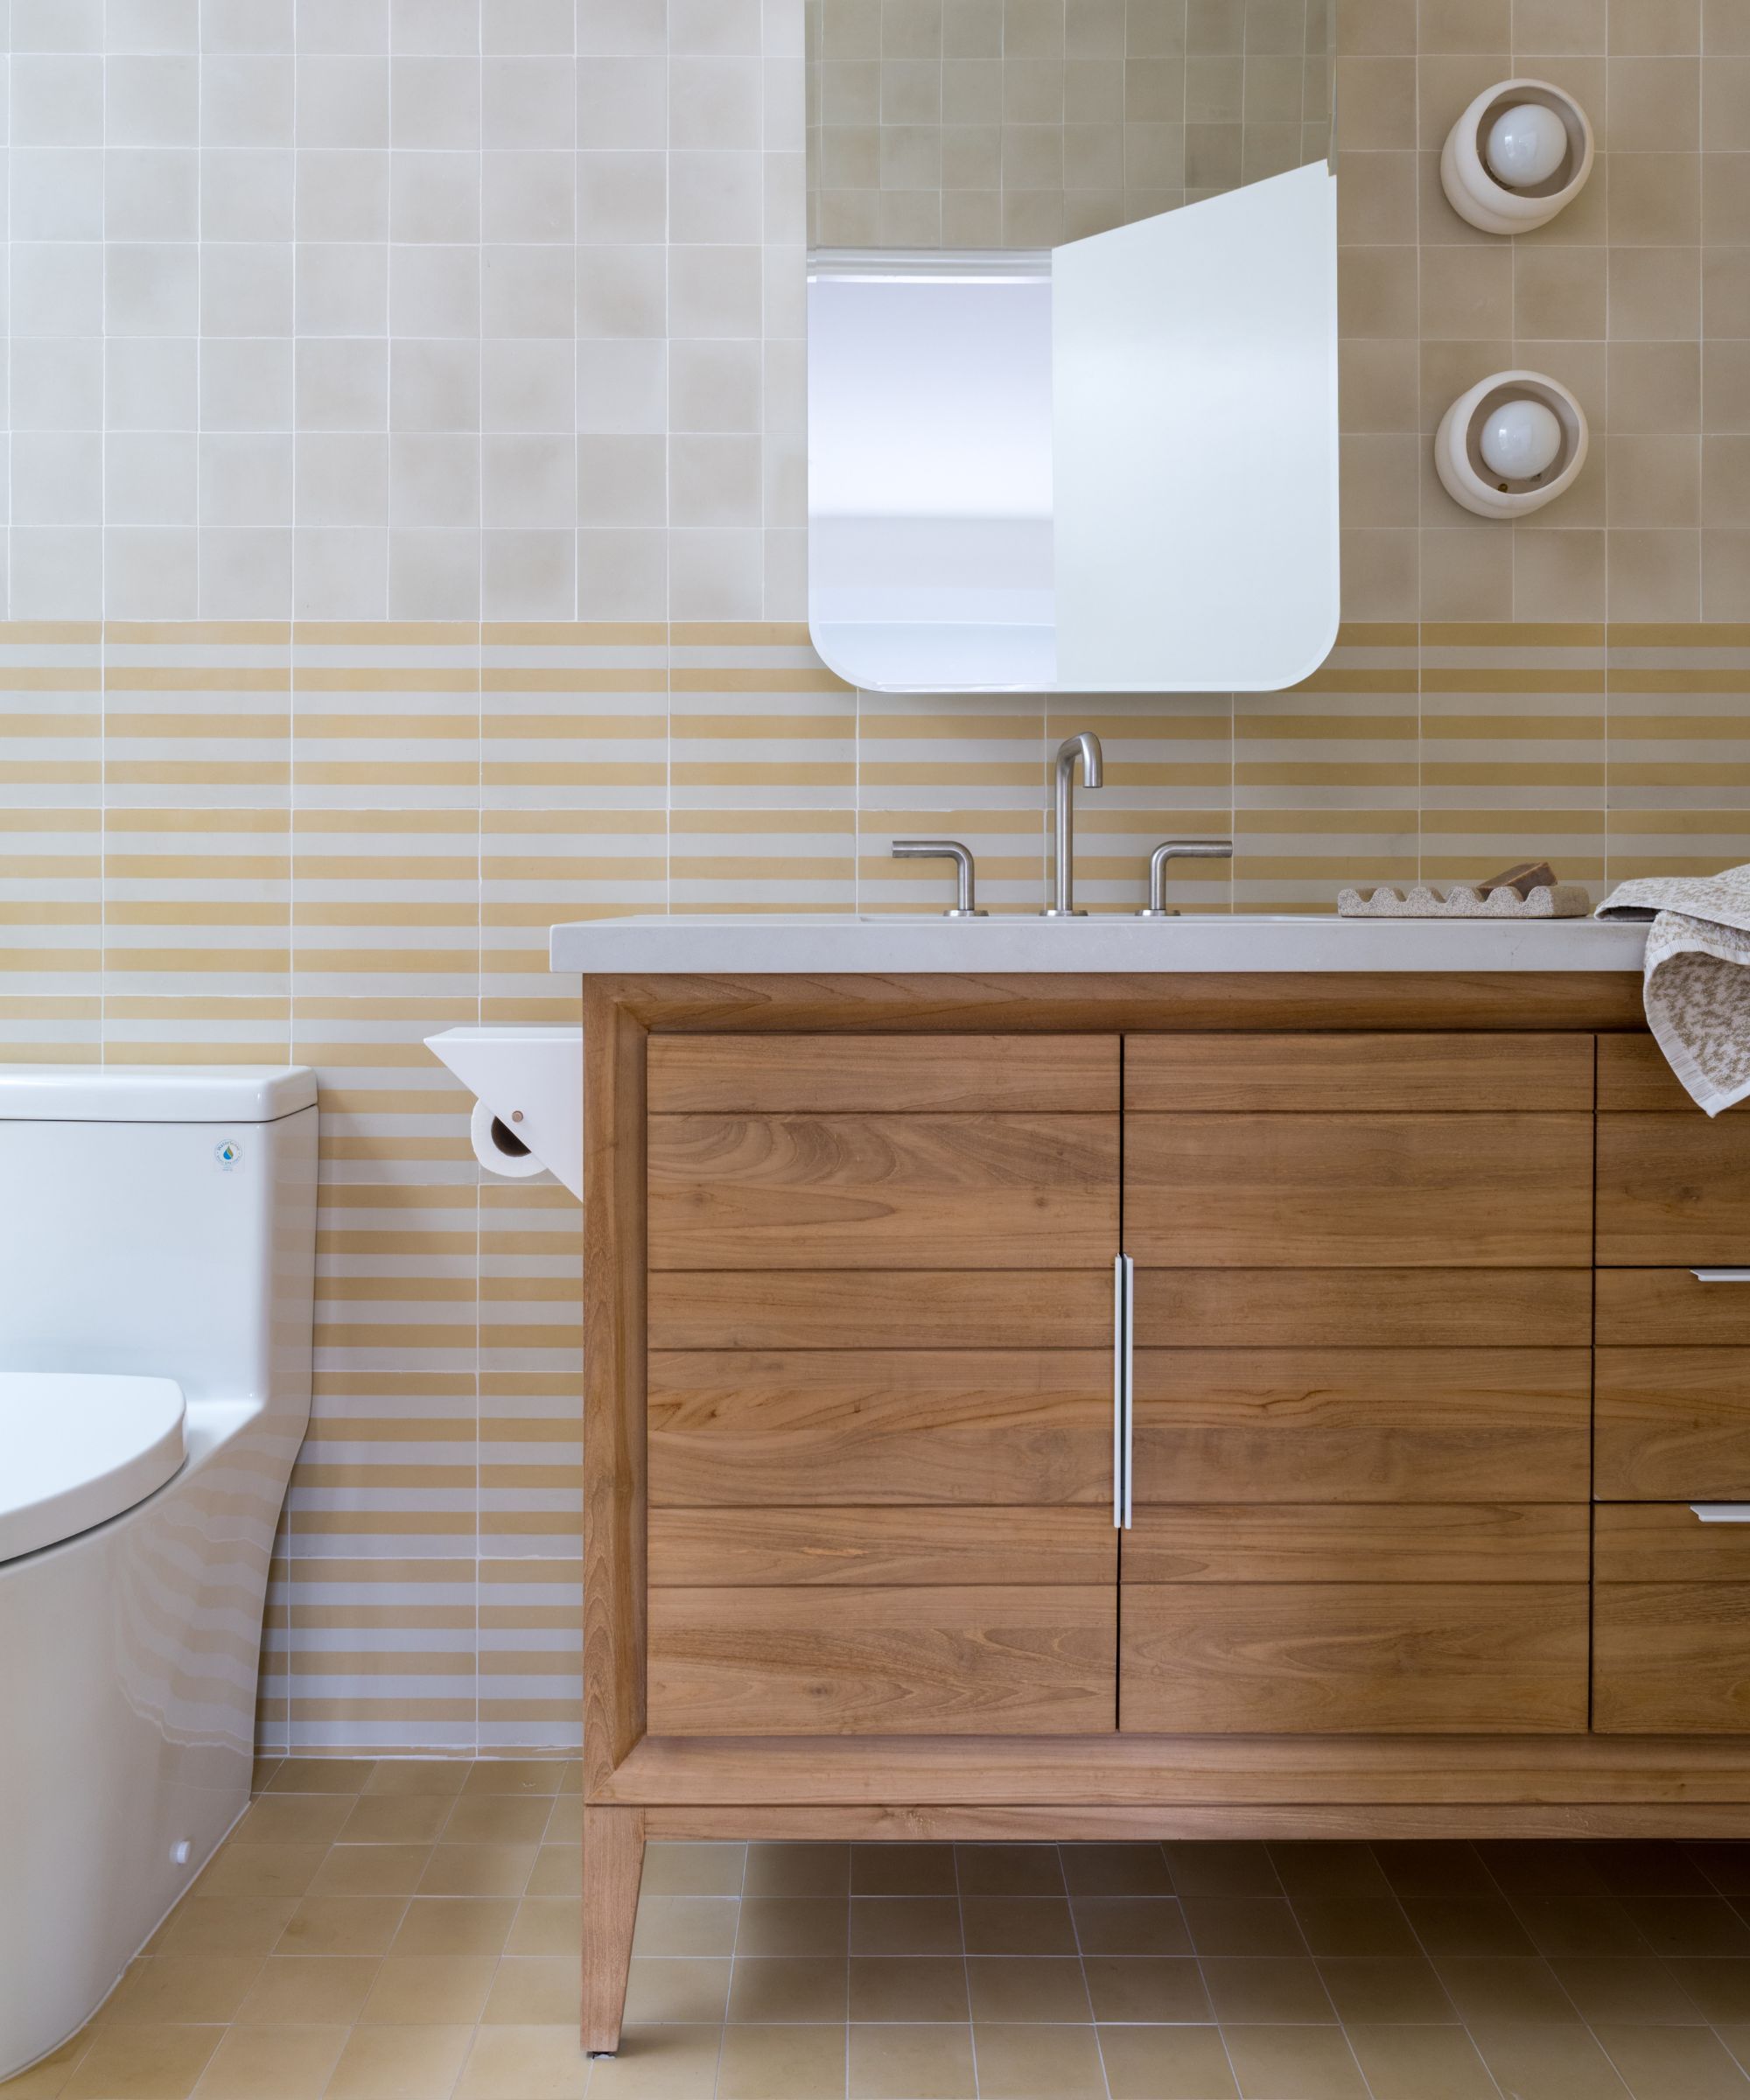 yellow horizontal striped tiles behind toilet and a wooden vanity sink unit